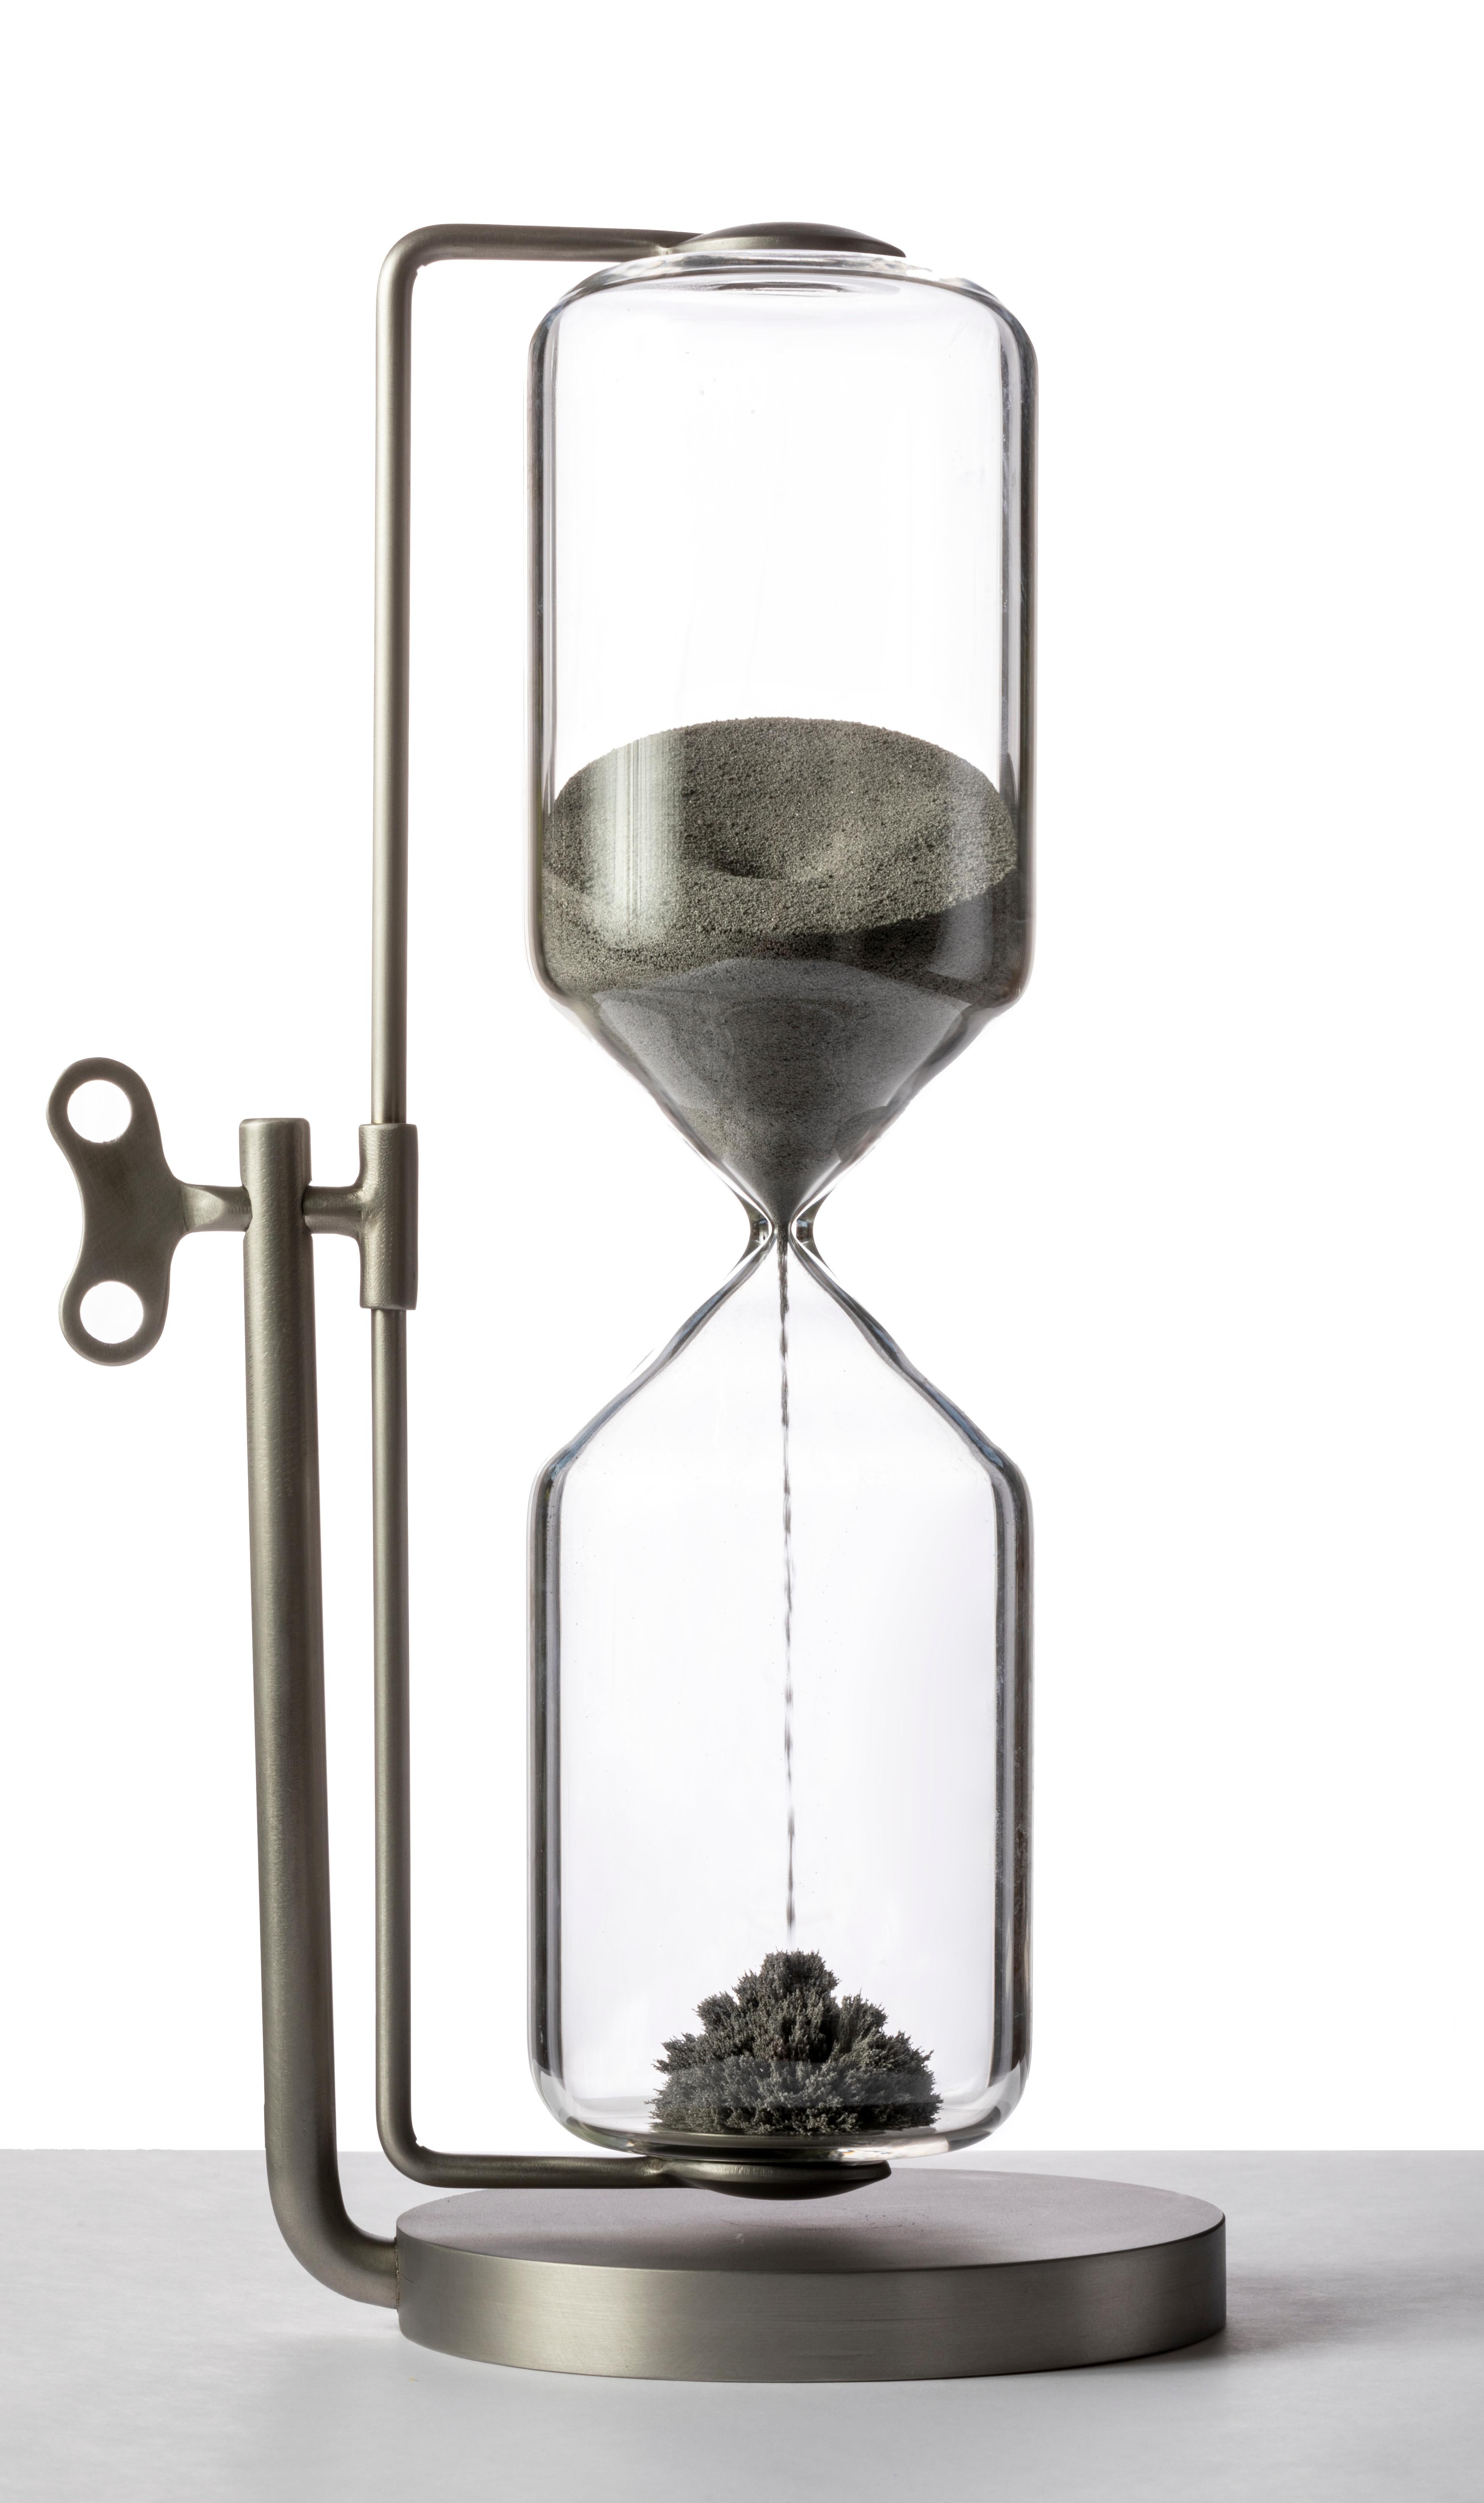 Timeless Hourglass by Secondome Edizioni
Limited Edition Of 30 Pieces.
Designer: CTRLZACK.
Dimensions: D 20 x W 13,5 x H 33 cm.
Materials: Handblown glass, magnet, iron powder and brass.

Collection / Production: Secondome. Available in brass and